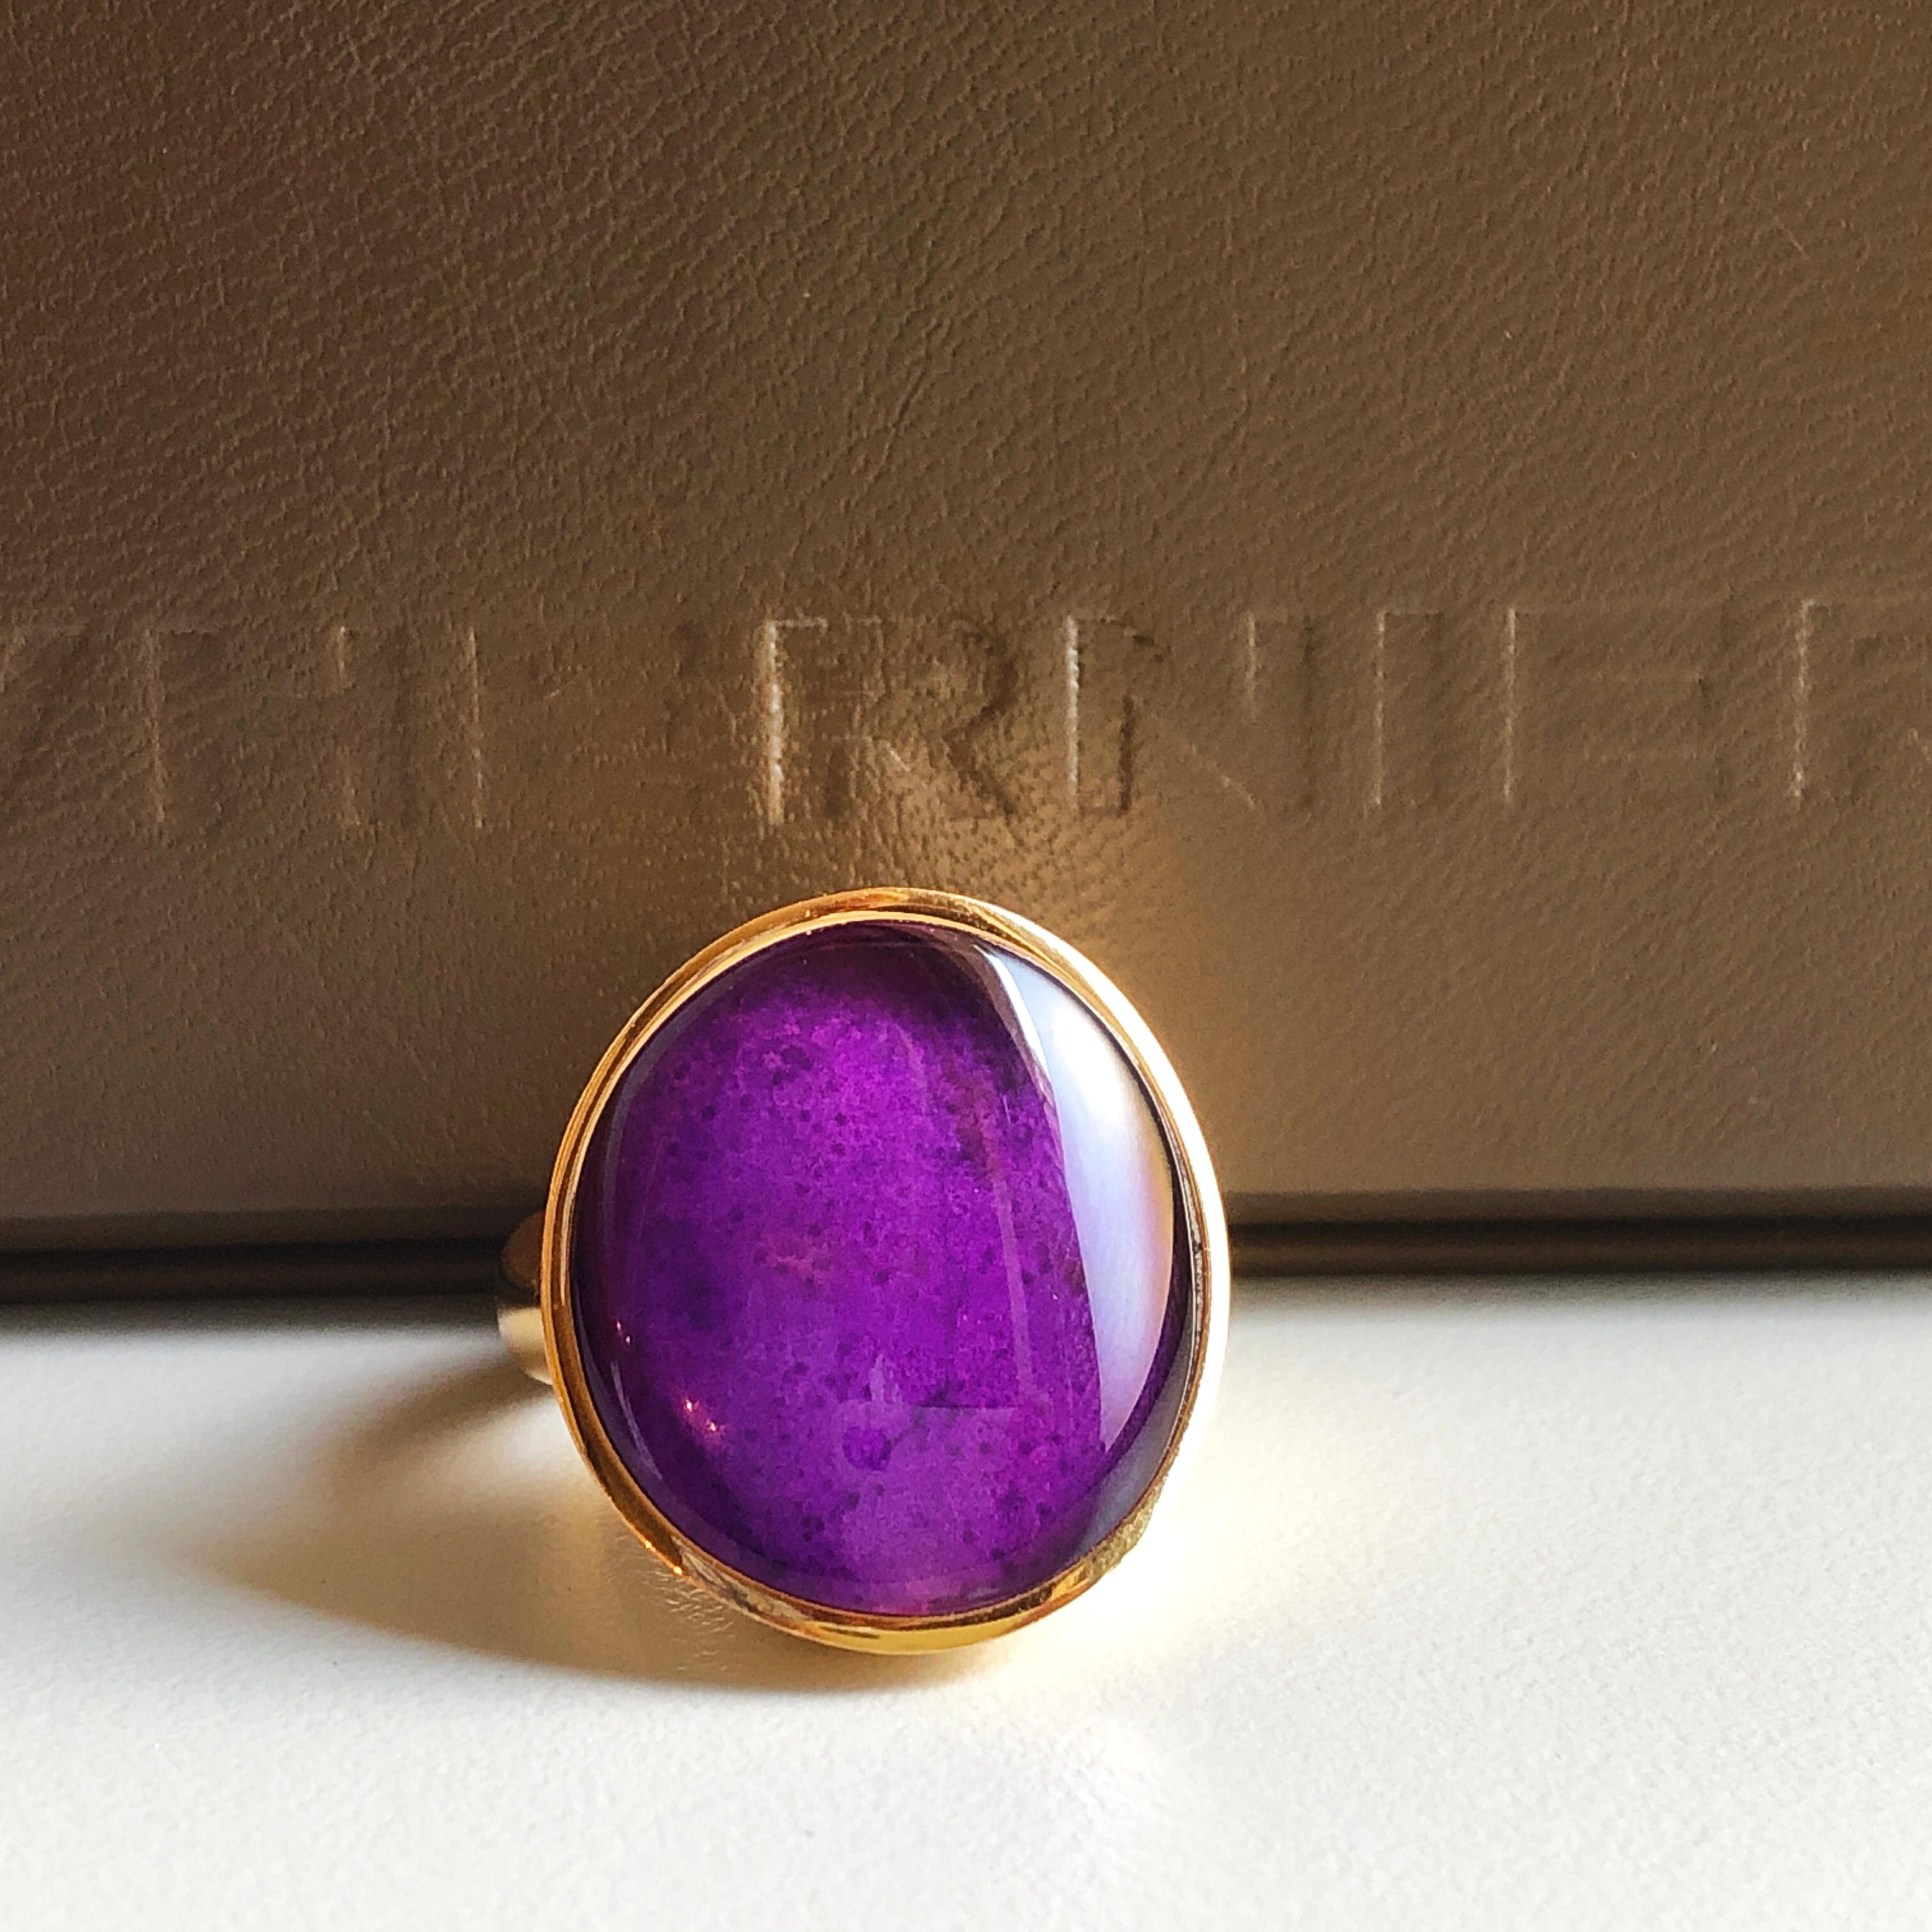 Women's Vhernier Rare Sugilite Rock Cystal Giotto Collection Yellow Gold Cocktail Ring